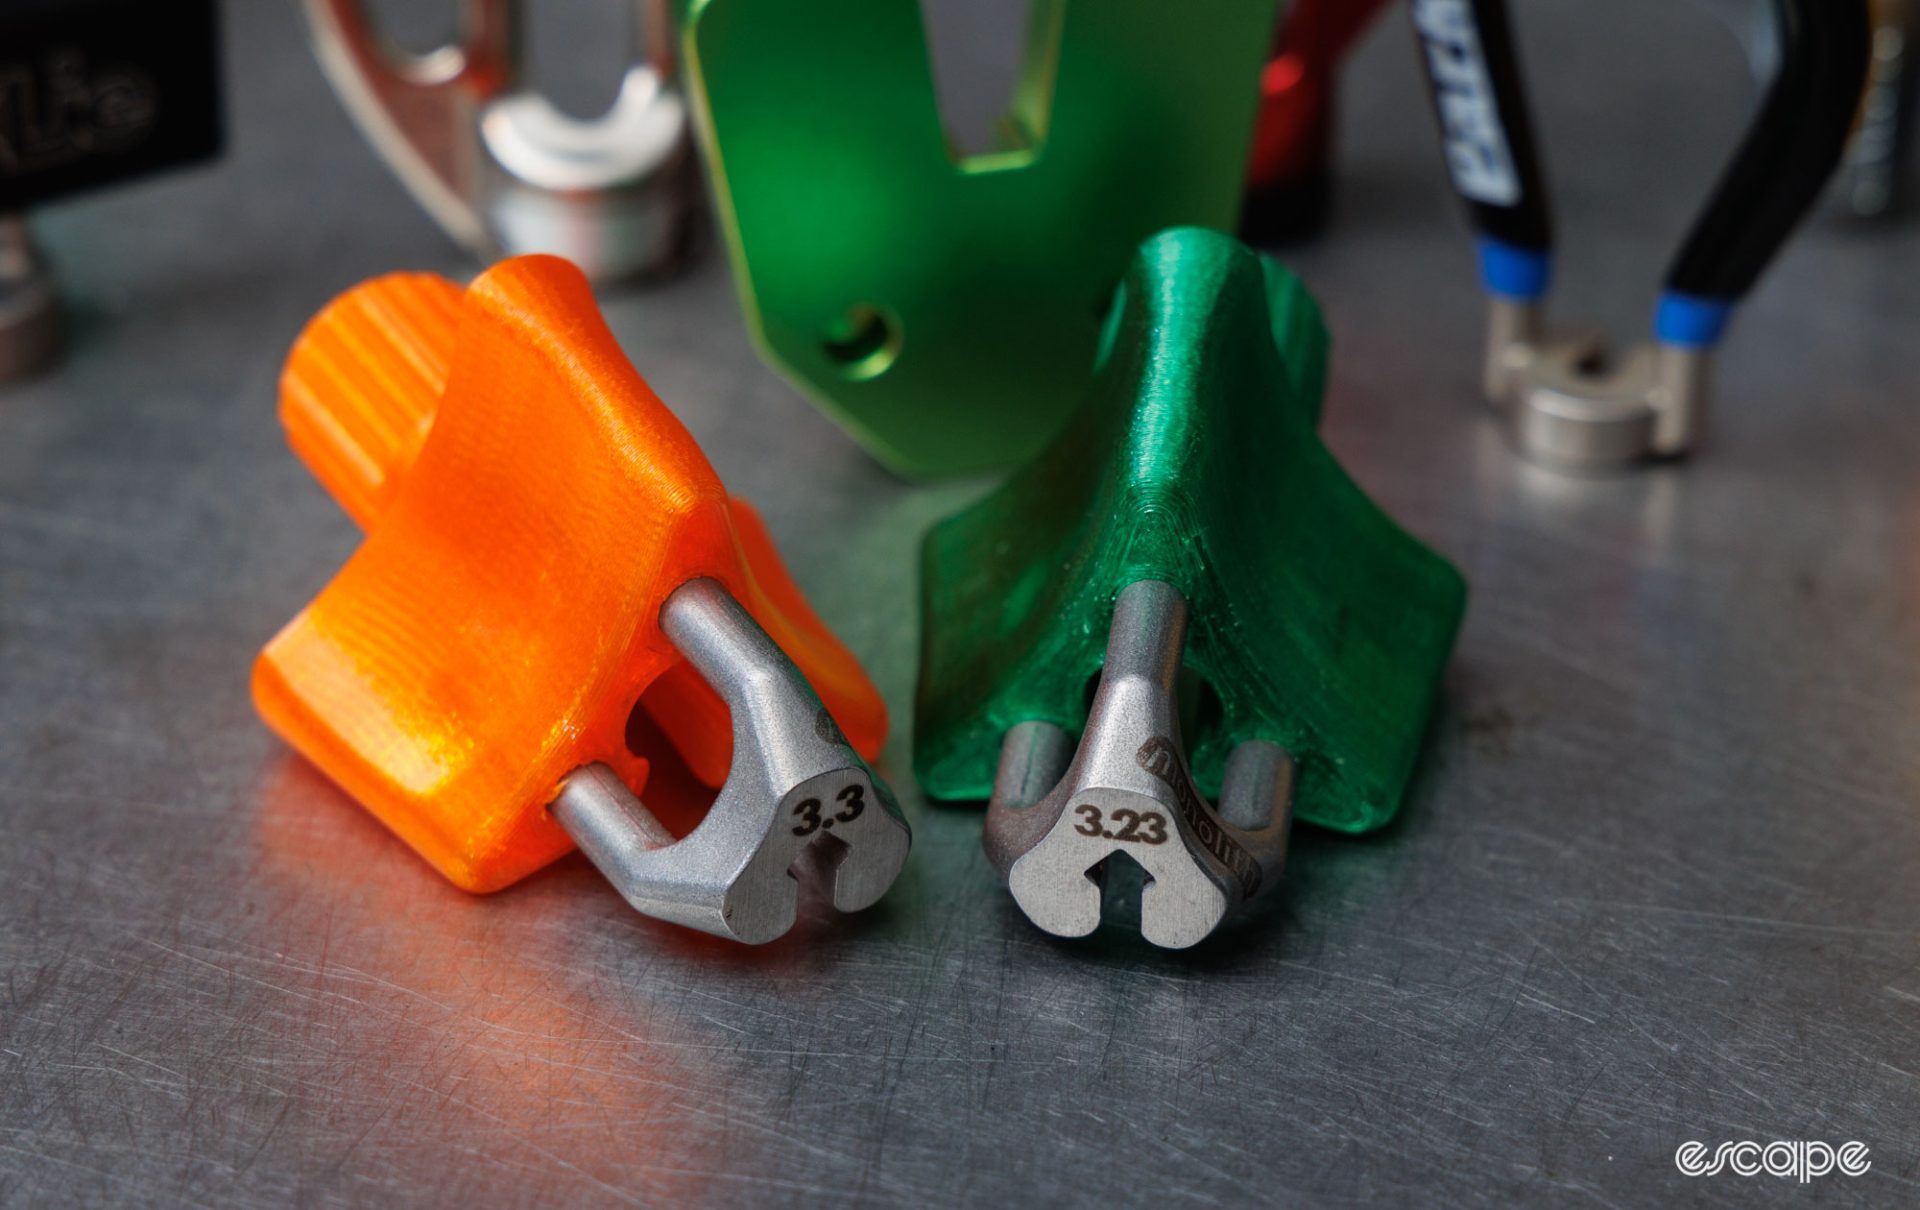 Two sizes of Monolith spoke tool sitting flat on a bench. One is orange and 3.3 mm in size, the other is green and 3.23 mm in size. 